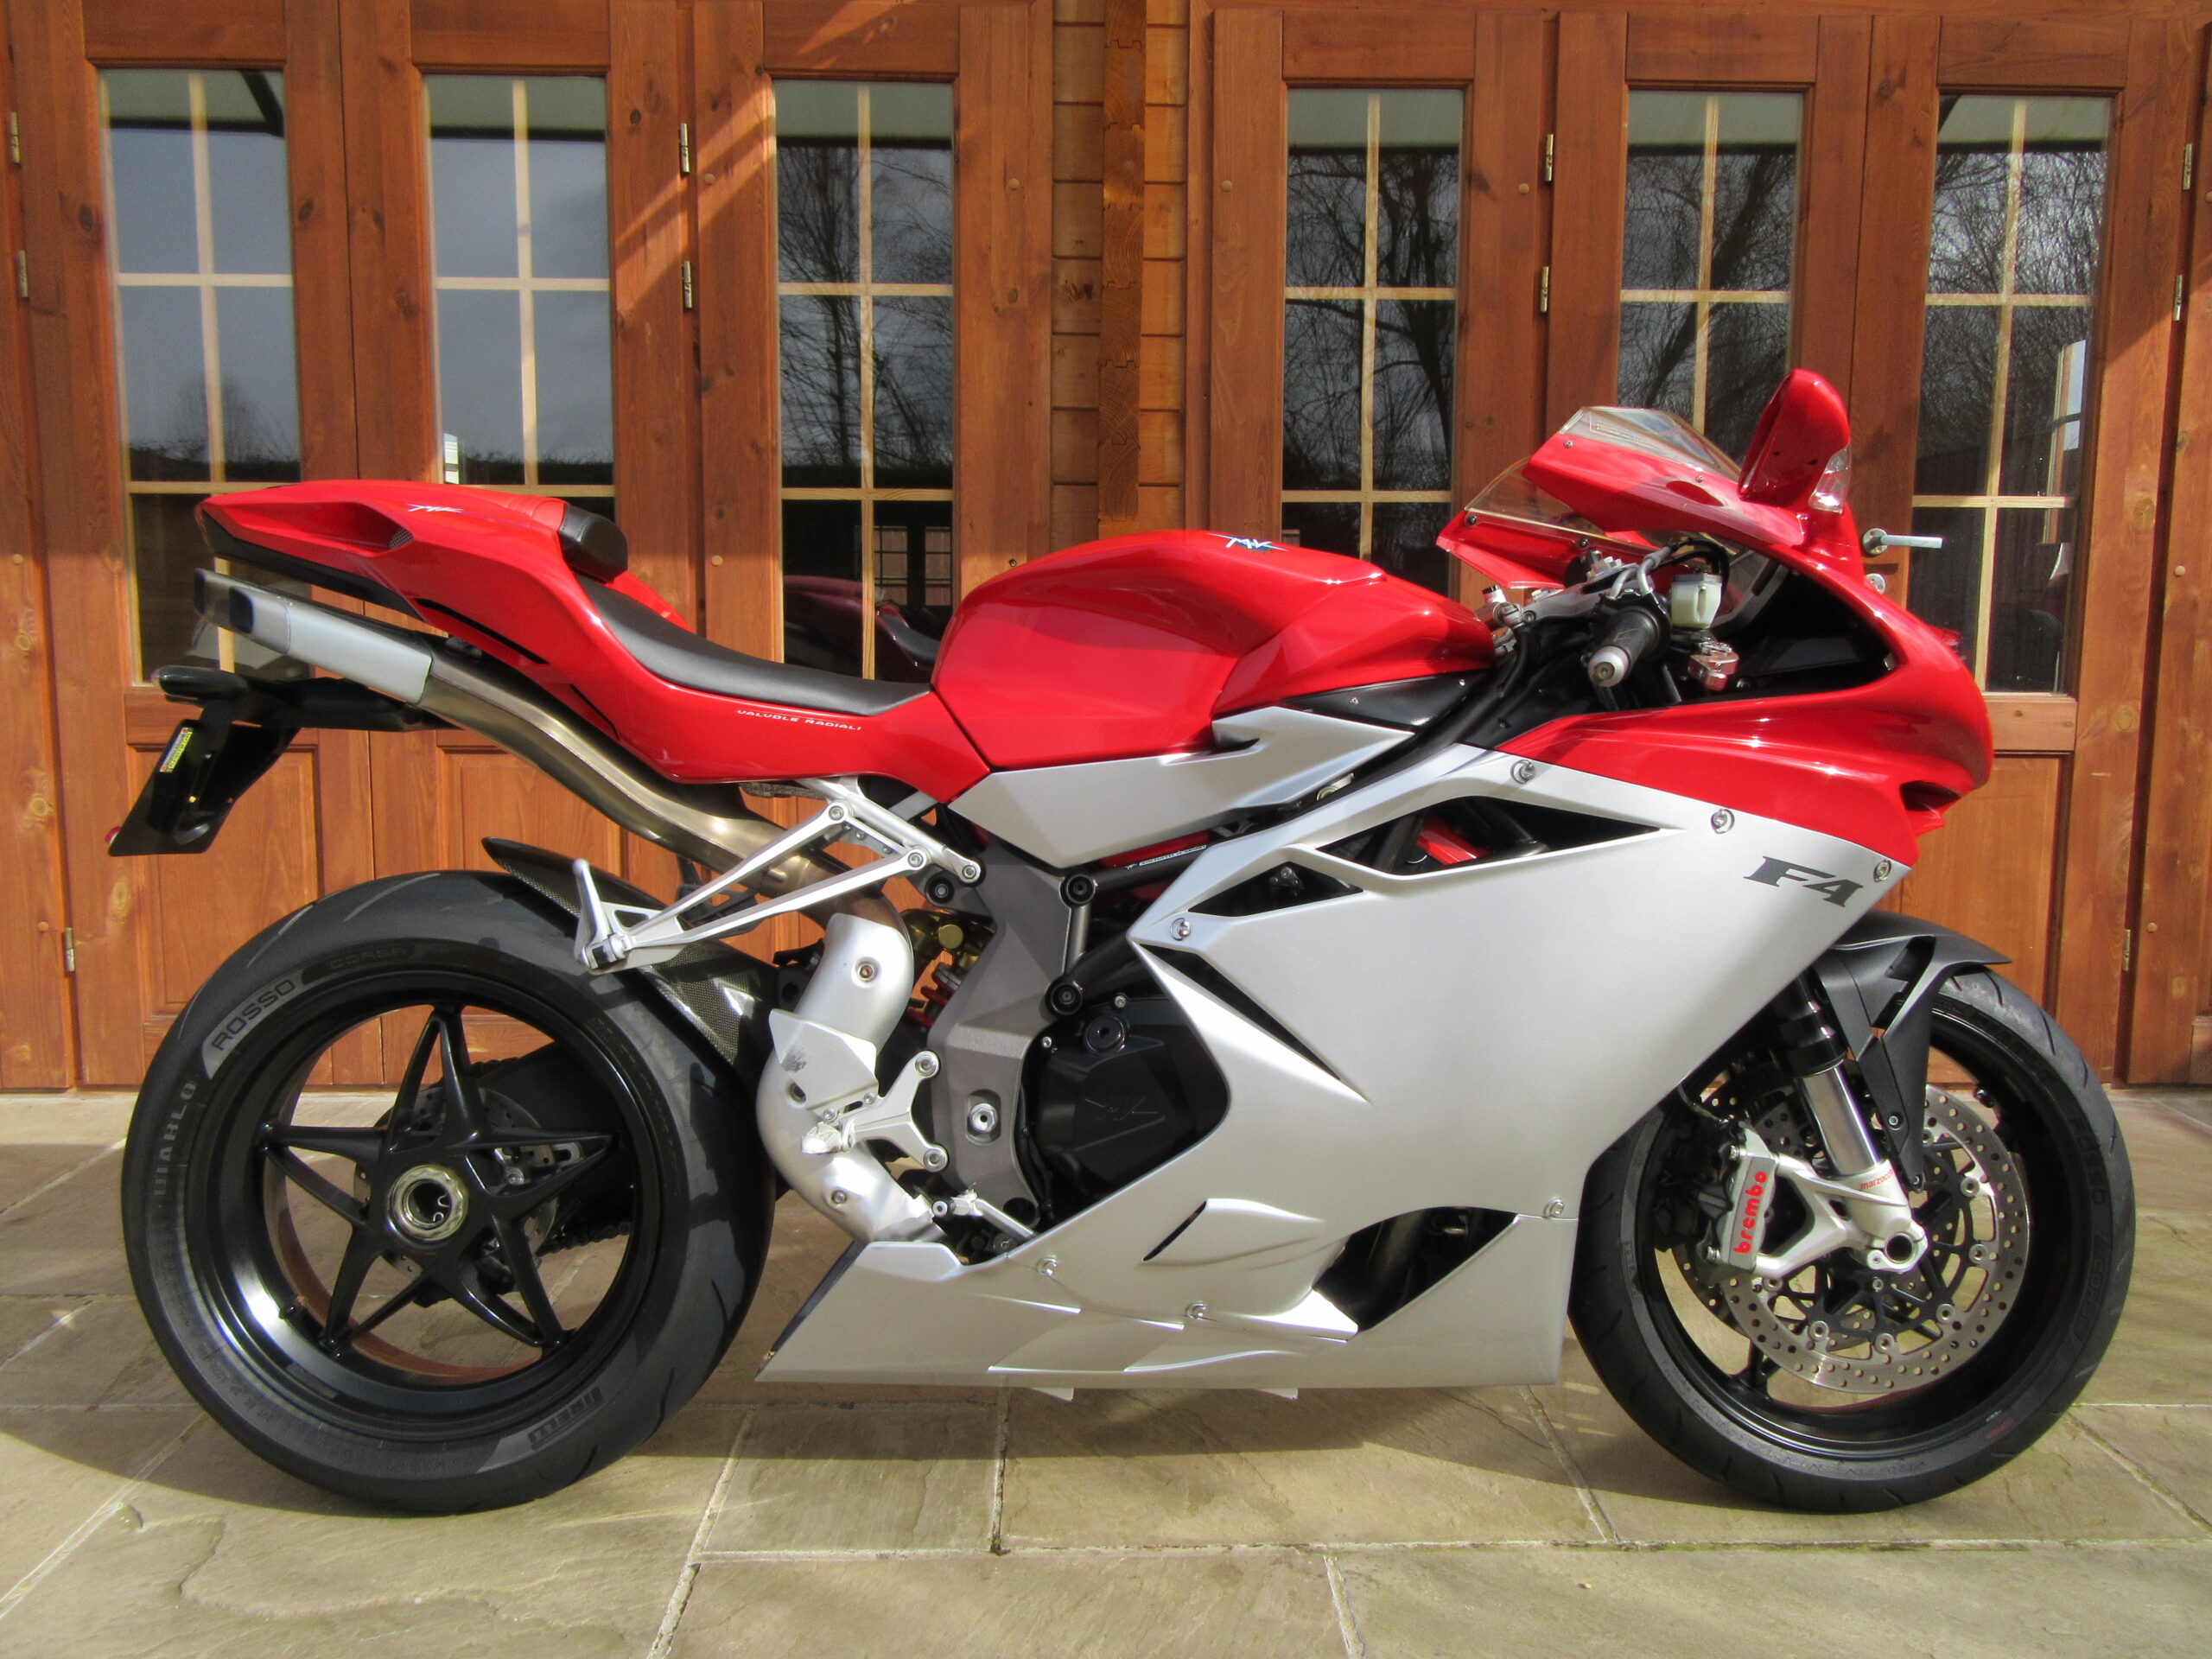 MV Agusta F4 1000R – Only 11,200 Miles, SORRY – NOW SOLD!!